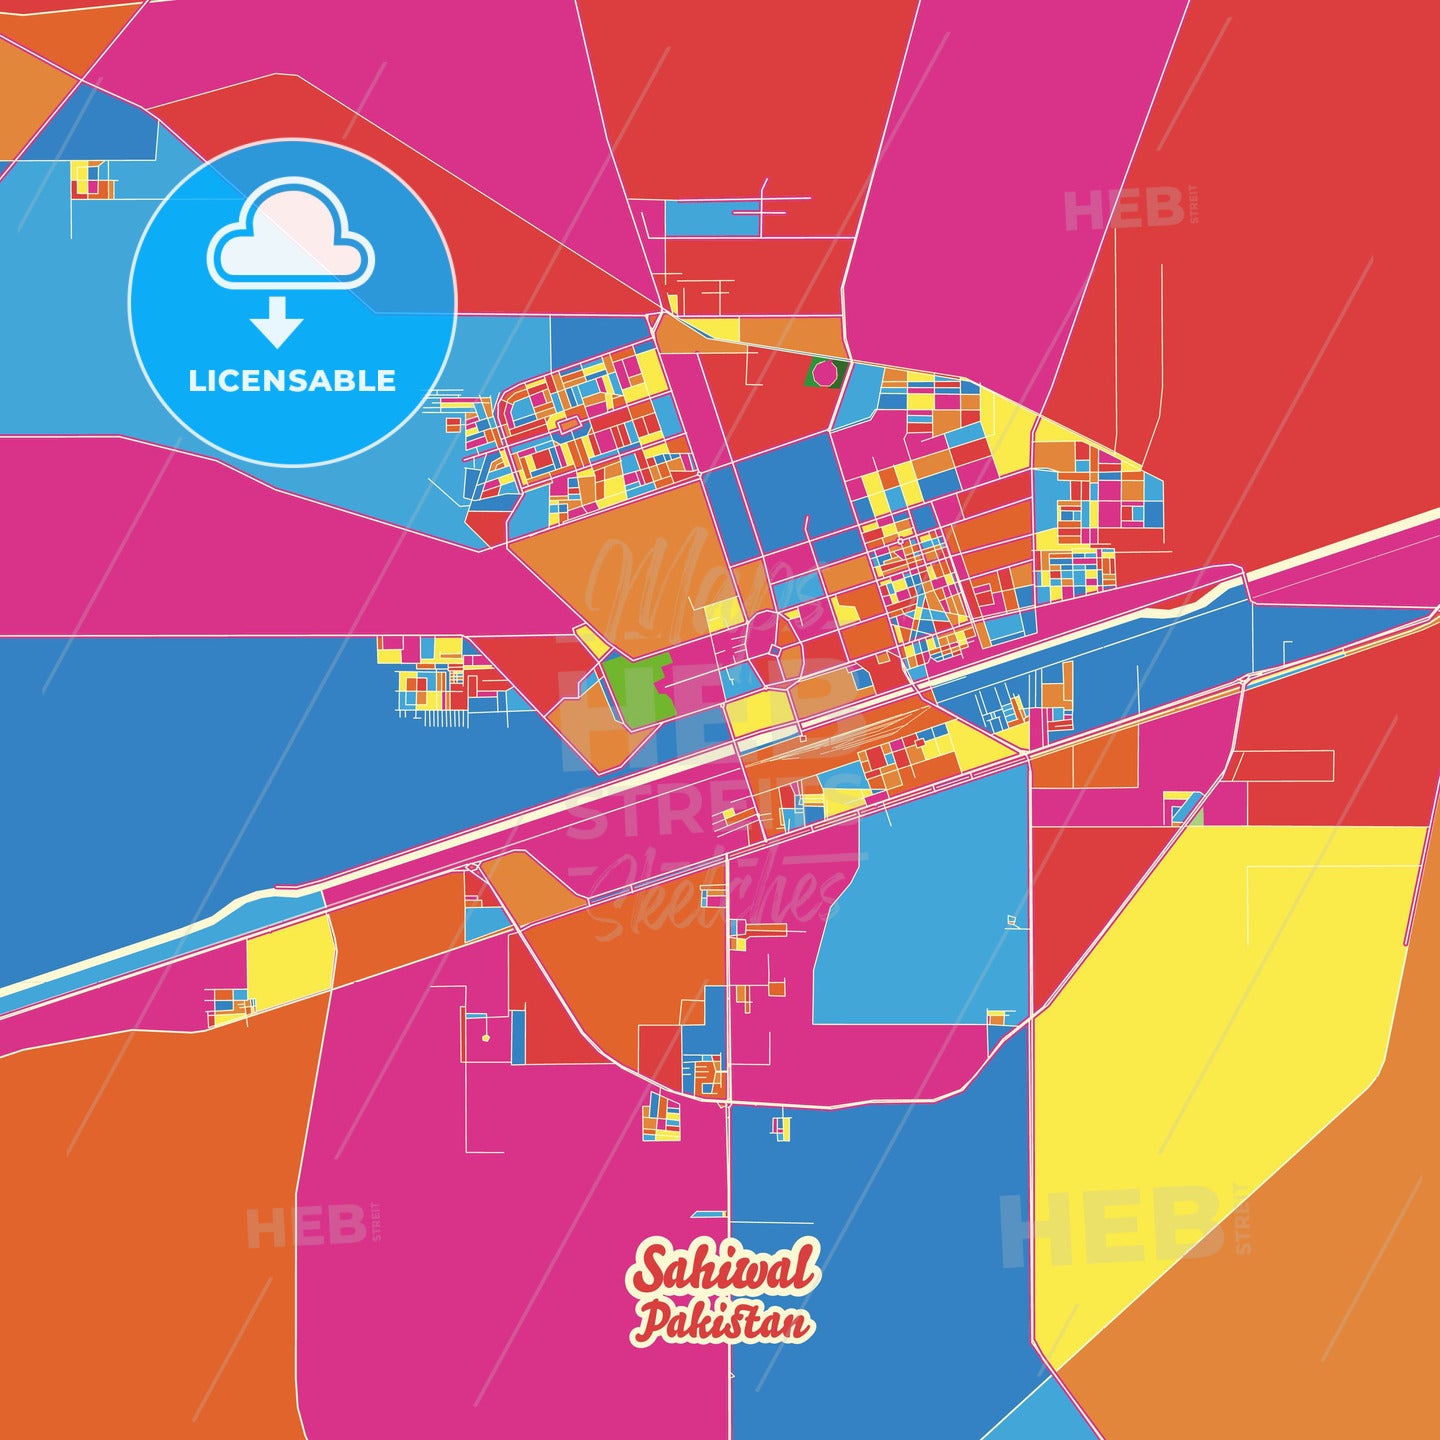 Sahiwal, Pakistan Crazy Colorful Street Map Poster Template - HEBSTREITS Sketches